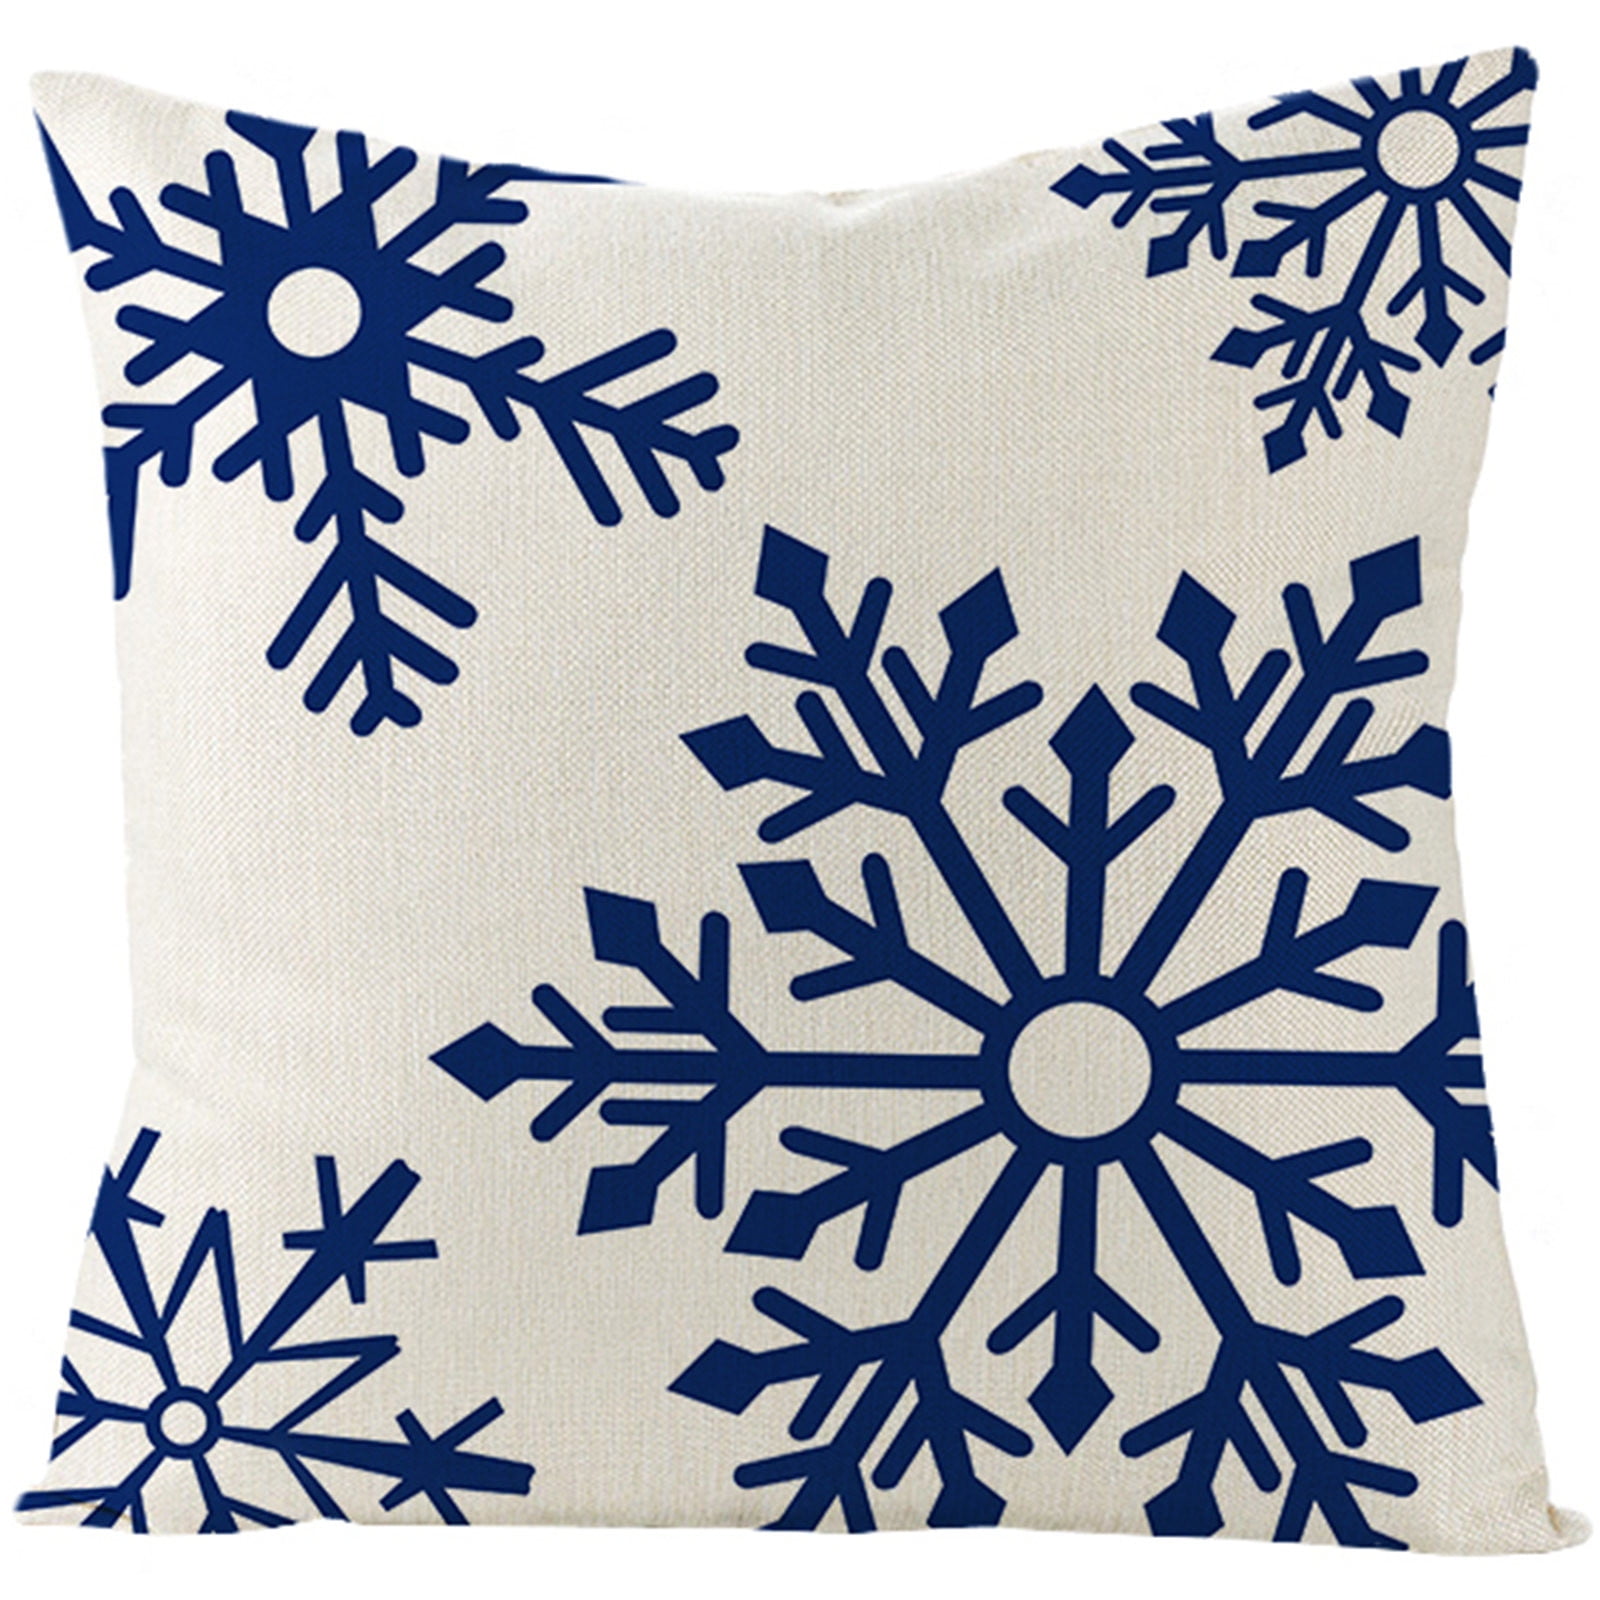 CozofLuv Christmas Pillow Covers 18x18 Inches Winter Pillow Covers  Christmas Pillow Cases Fundas para Cojines Decorativos